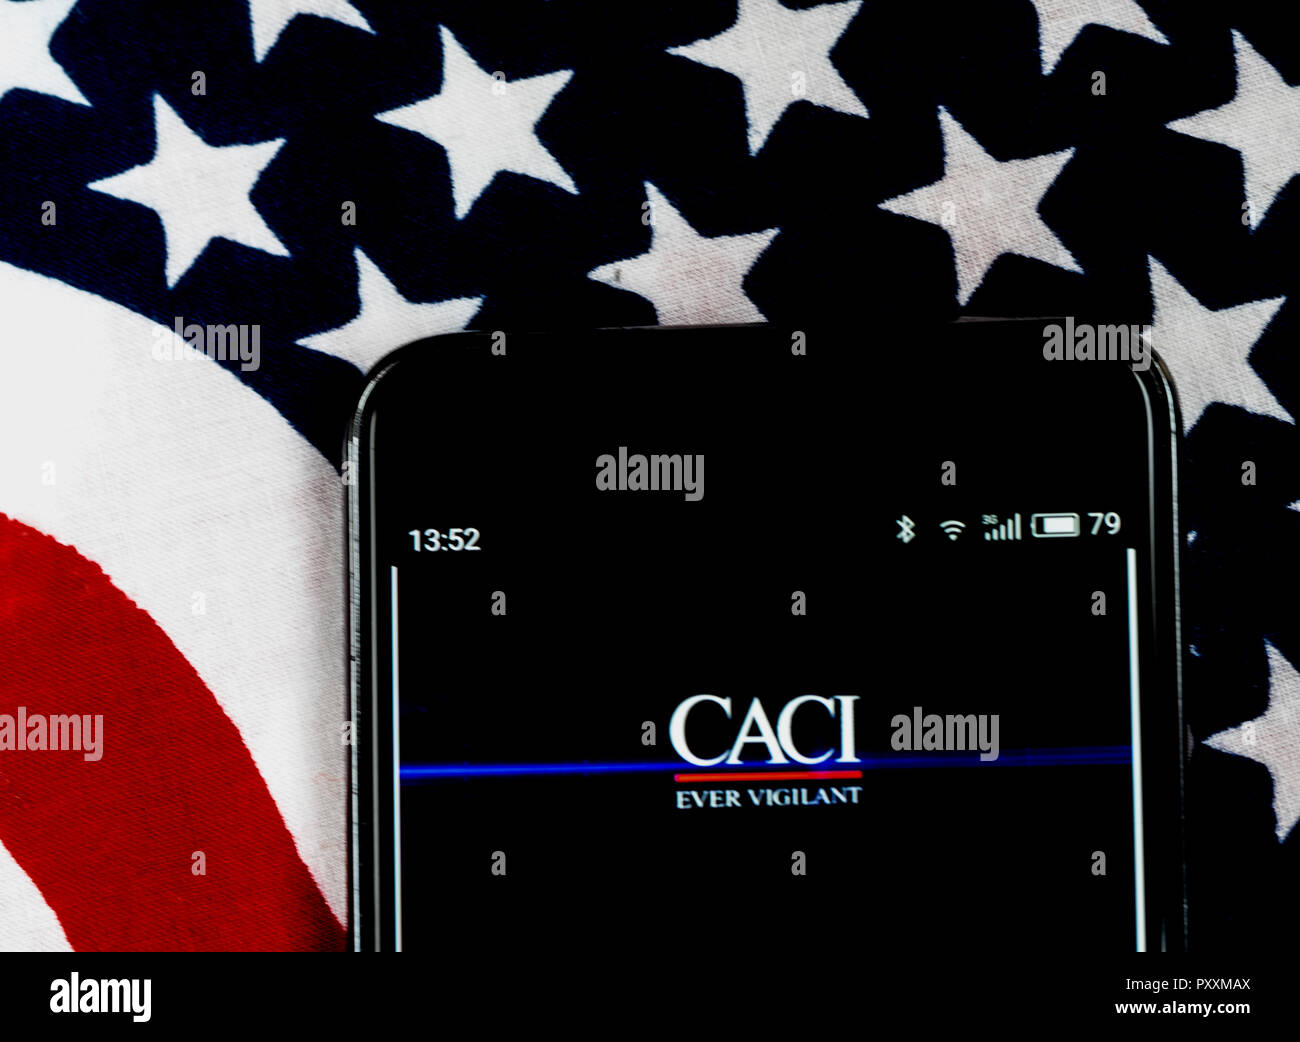 CACI Information technology company logo seen displayed on smart phone.. CACI International Inc is an American multinational professional services and information technology company headquartered in Arlington, Virginia. CACI provides services to many branches of the federal government including defense, homeland security, intelligence, and healthcare. Stock Photo